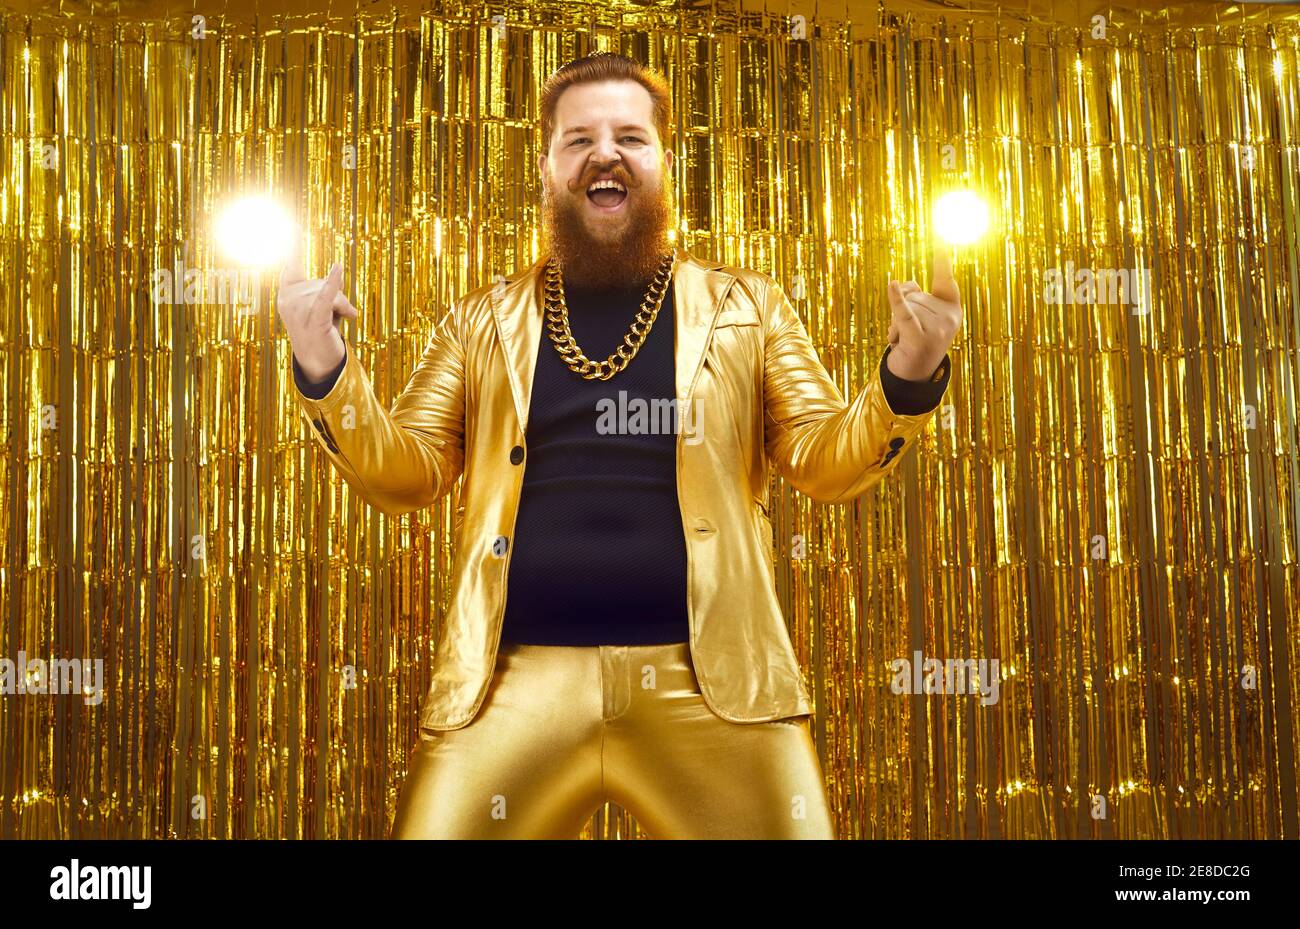 Funny crazy bearded chubby man in shiny golden suit having fun at disco club party Stock Photo